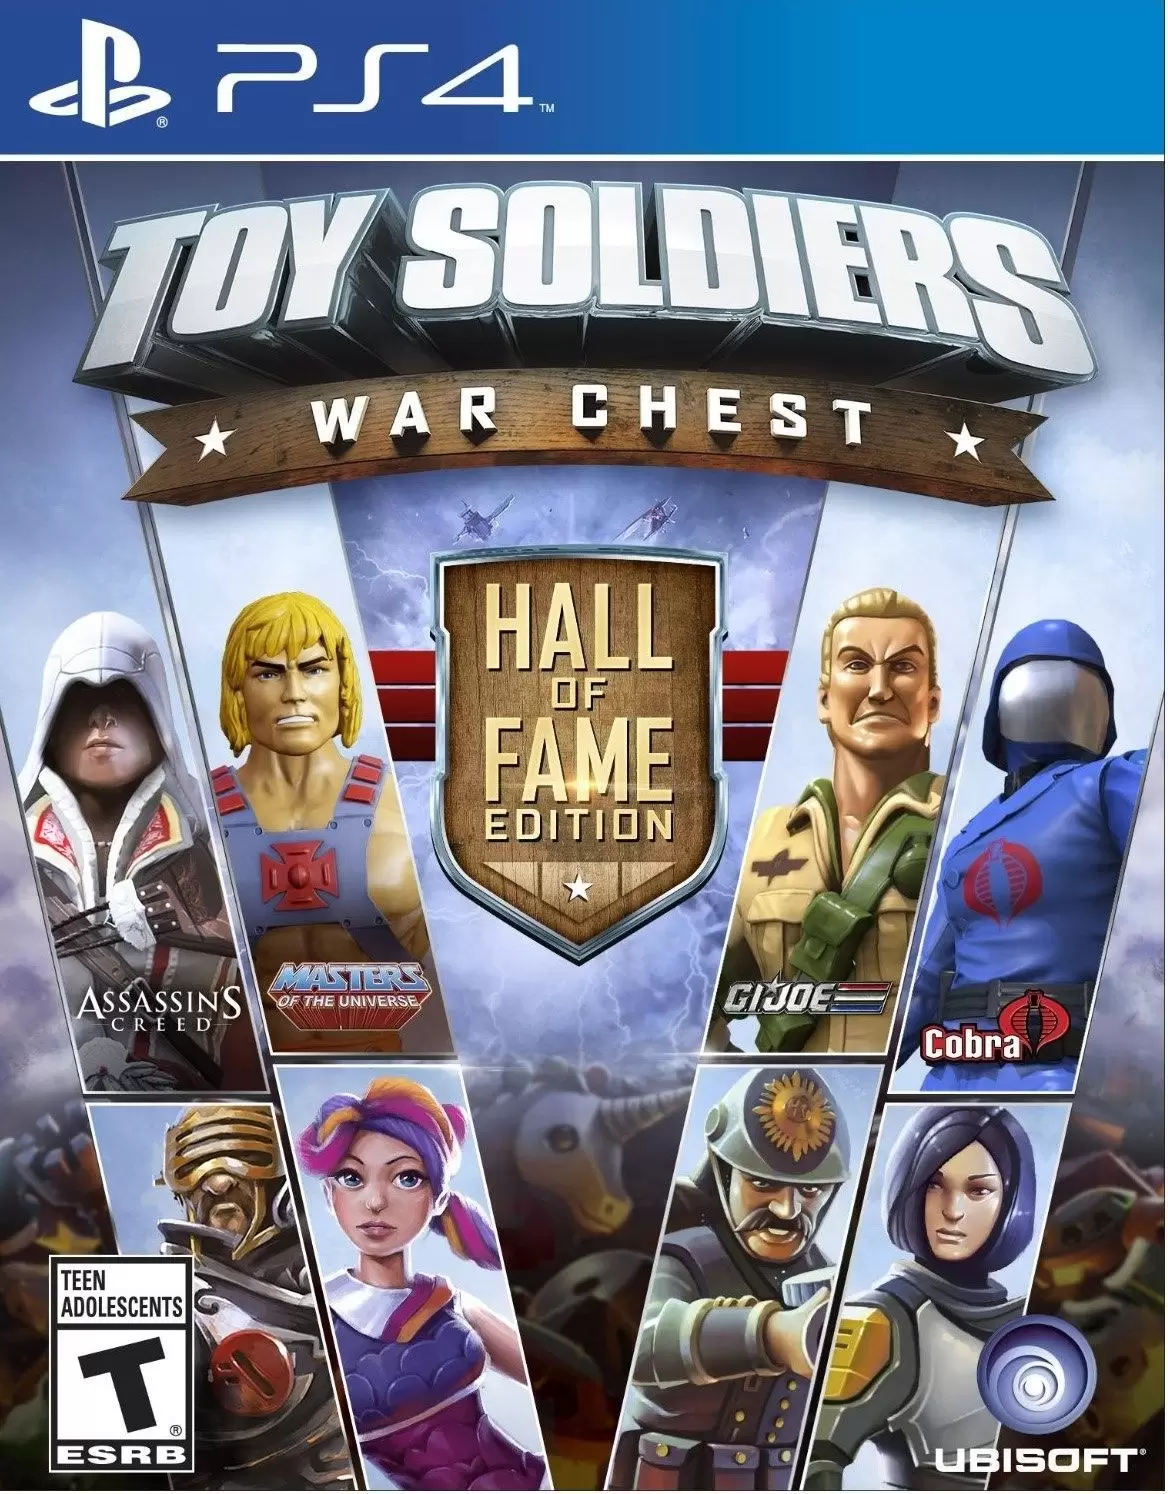 PS4 Games - Toy Soldiers: War Chest